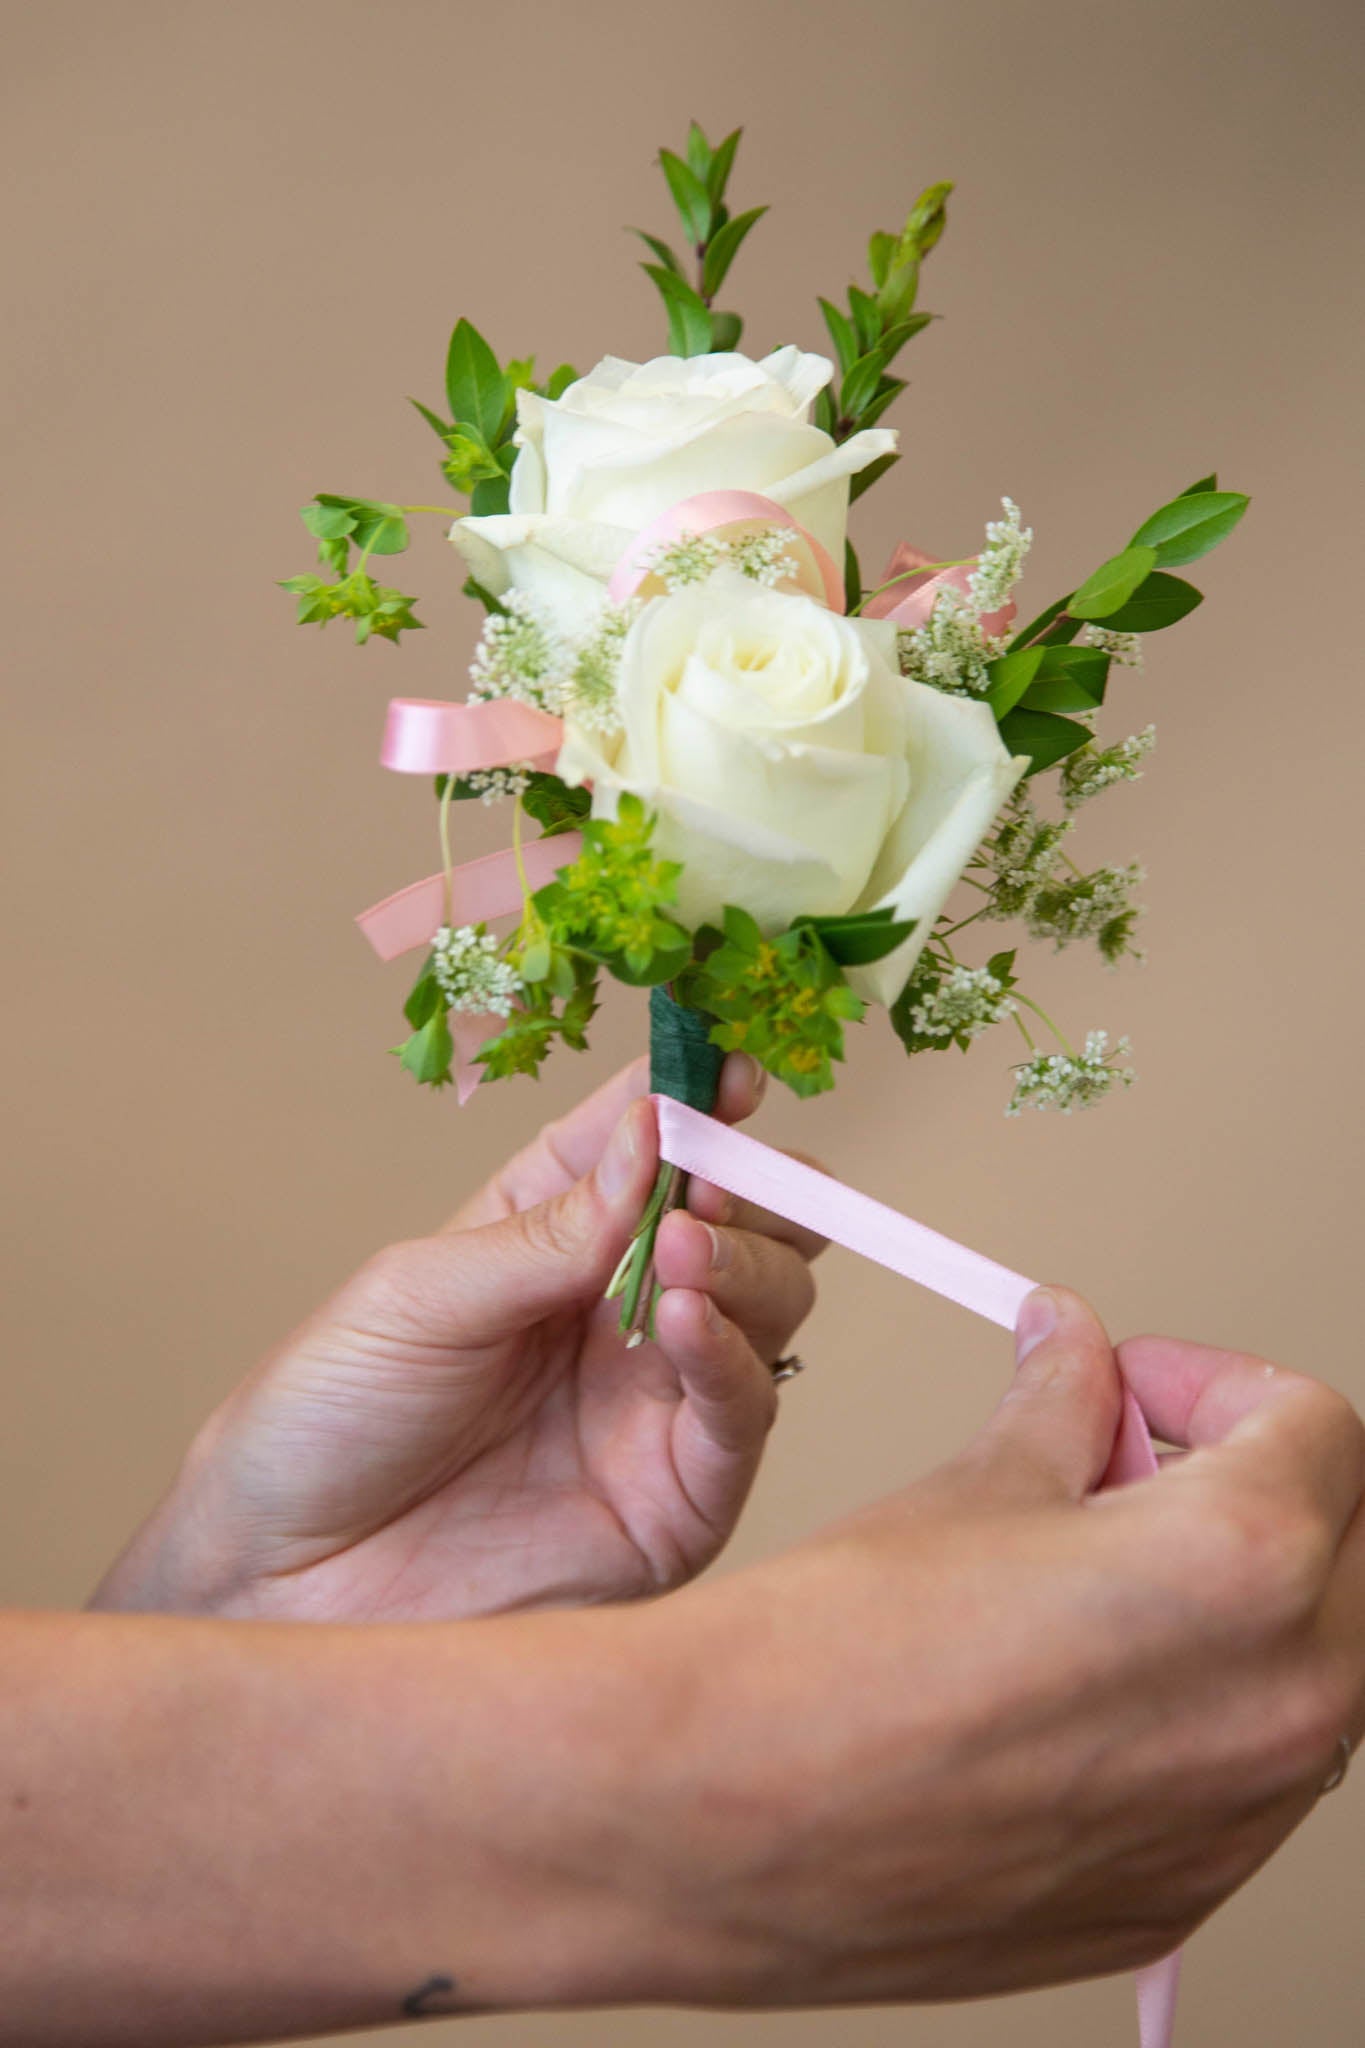 Final Step of How to Make a Corsage: Wrap and tie in Ribbon